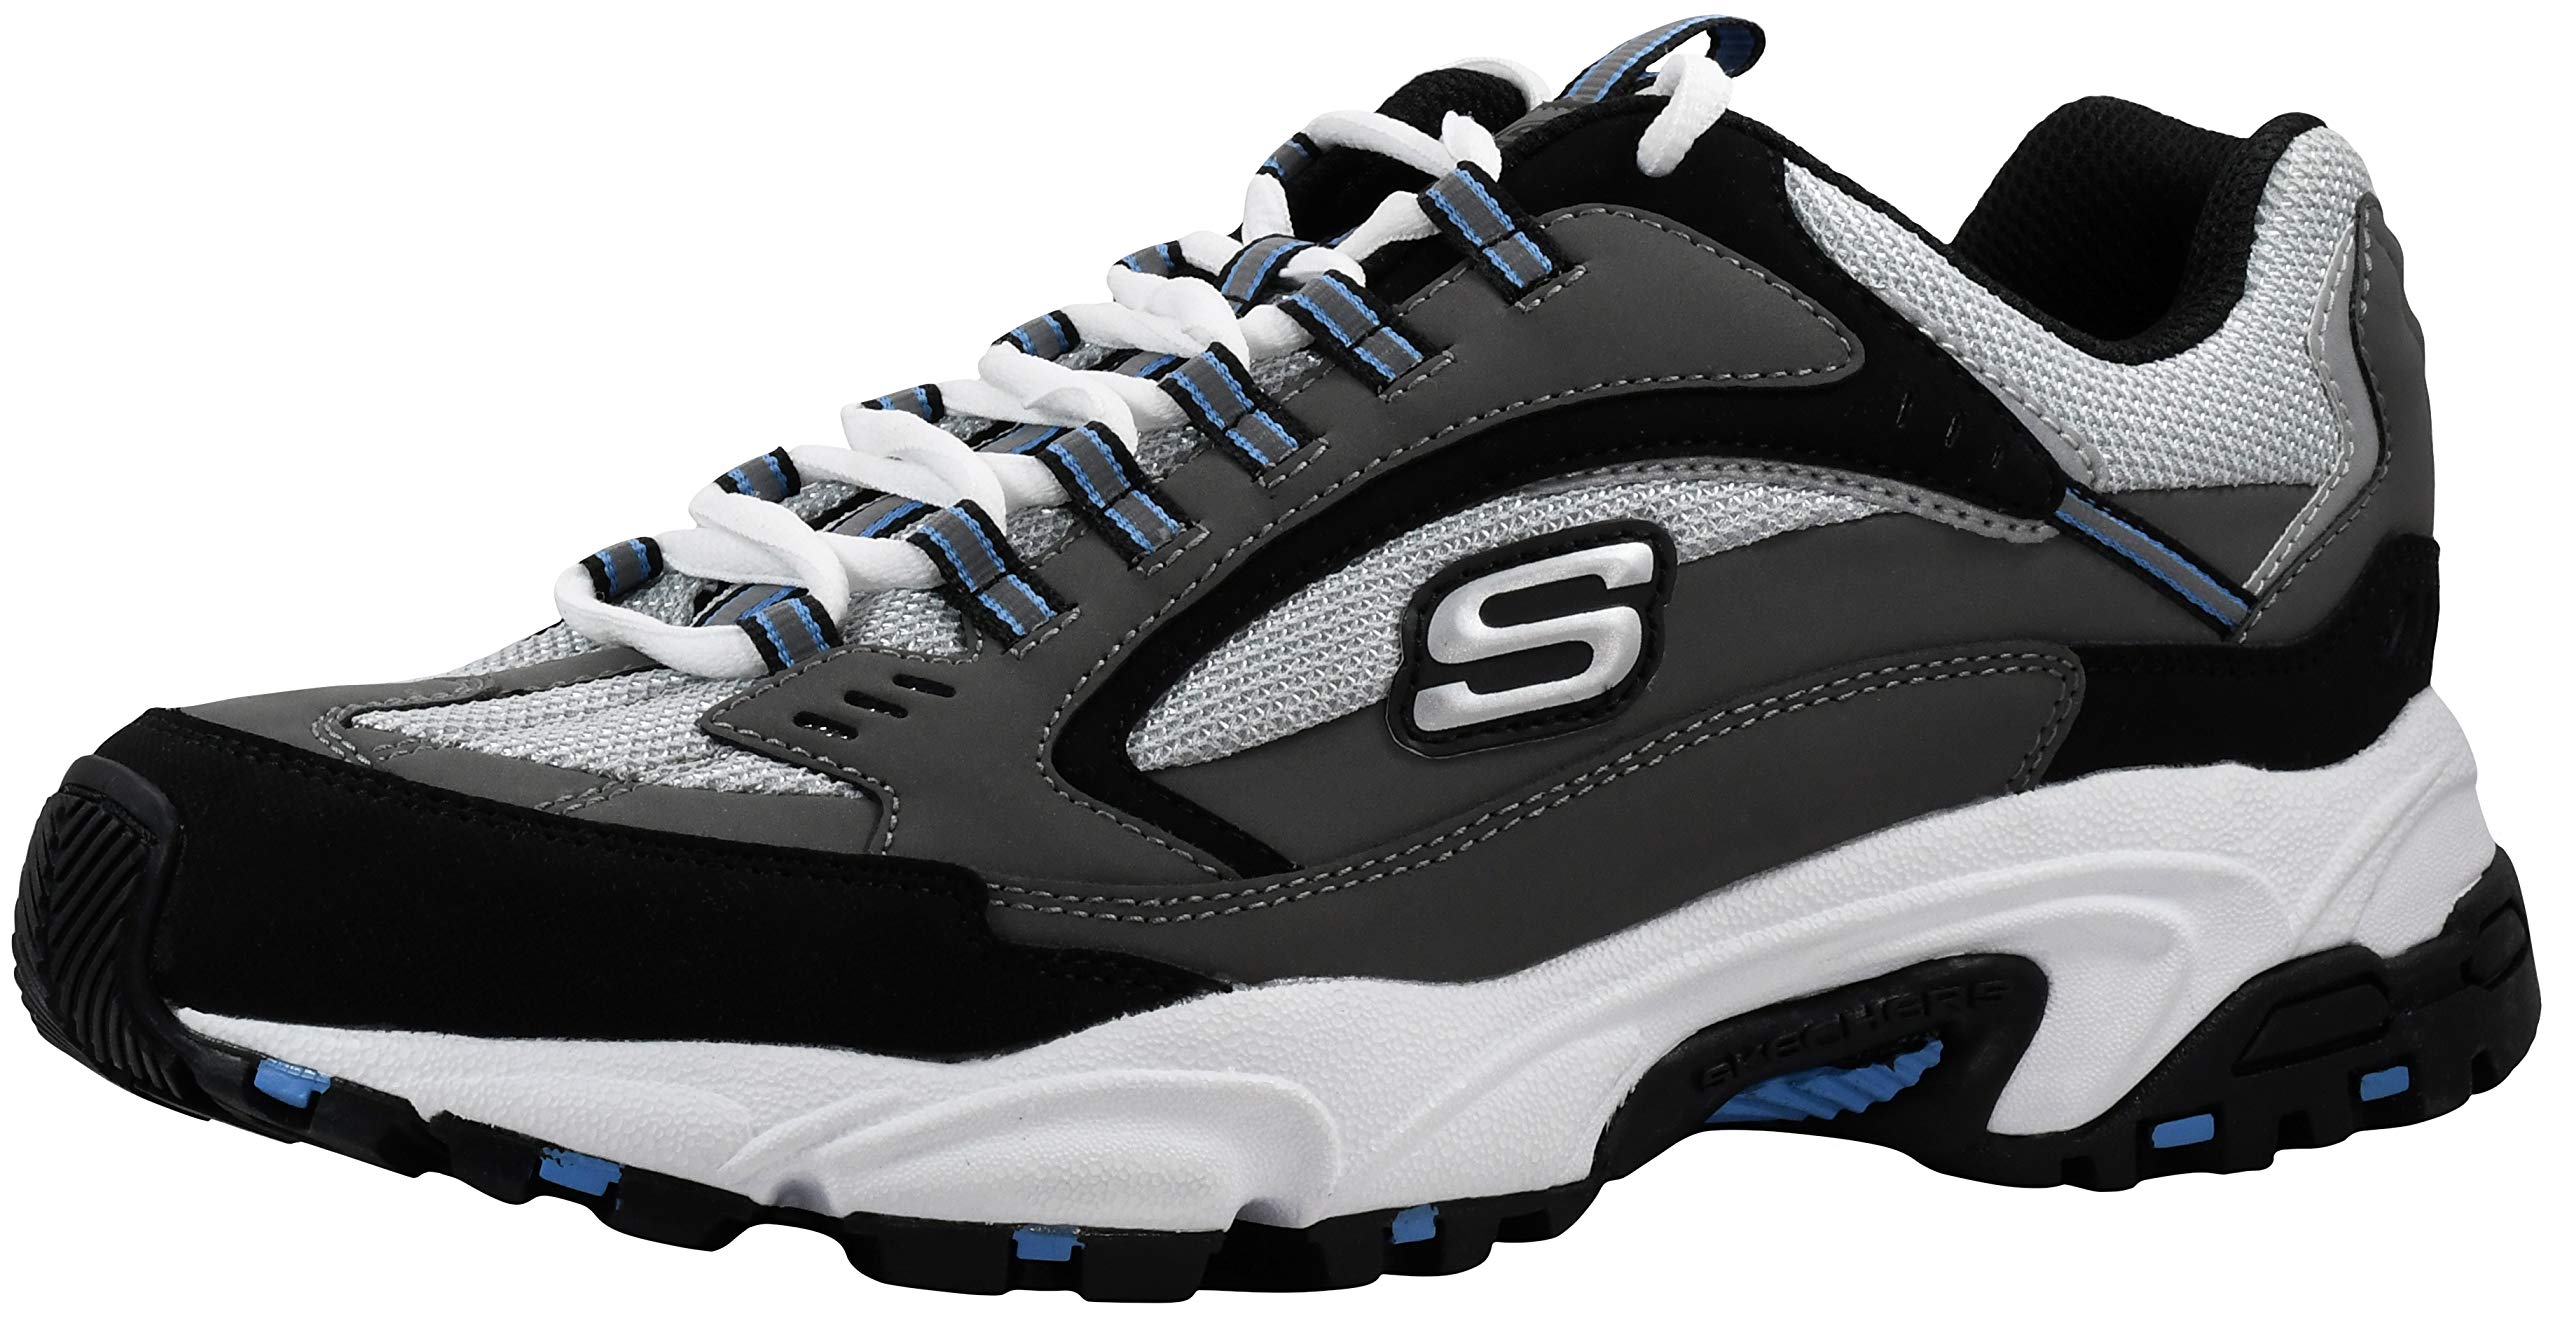 lezing Corroderen Vouwen Skechers Mens Stamina Nuovo Cutback Lace-Up Sneaker Charcoalgray 13 Wide